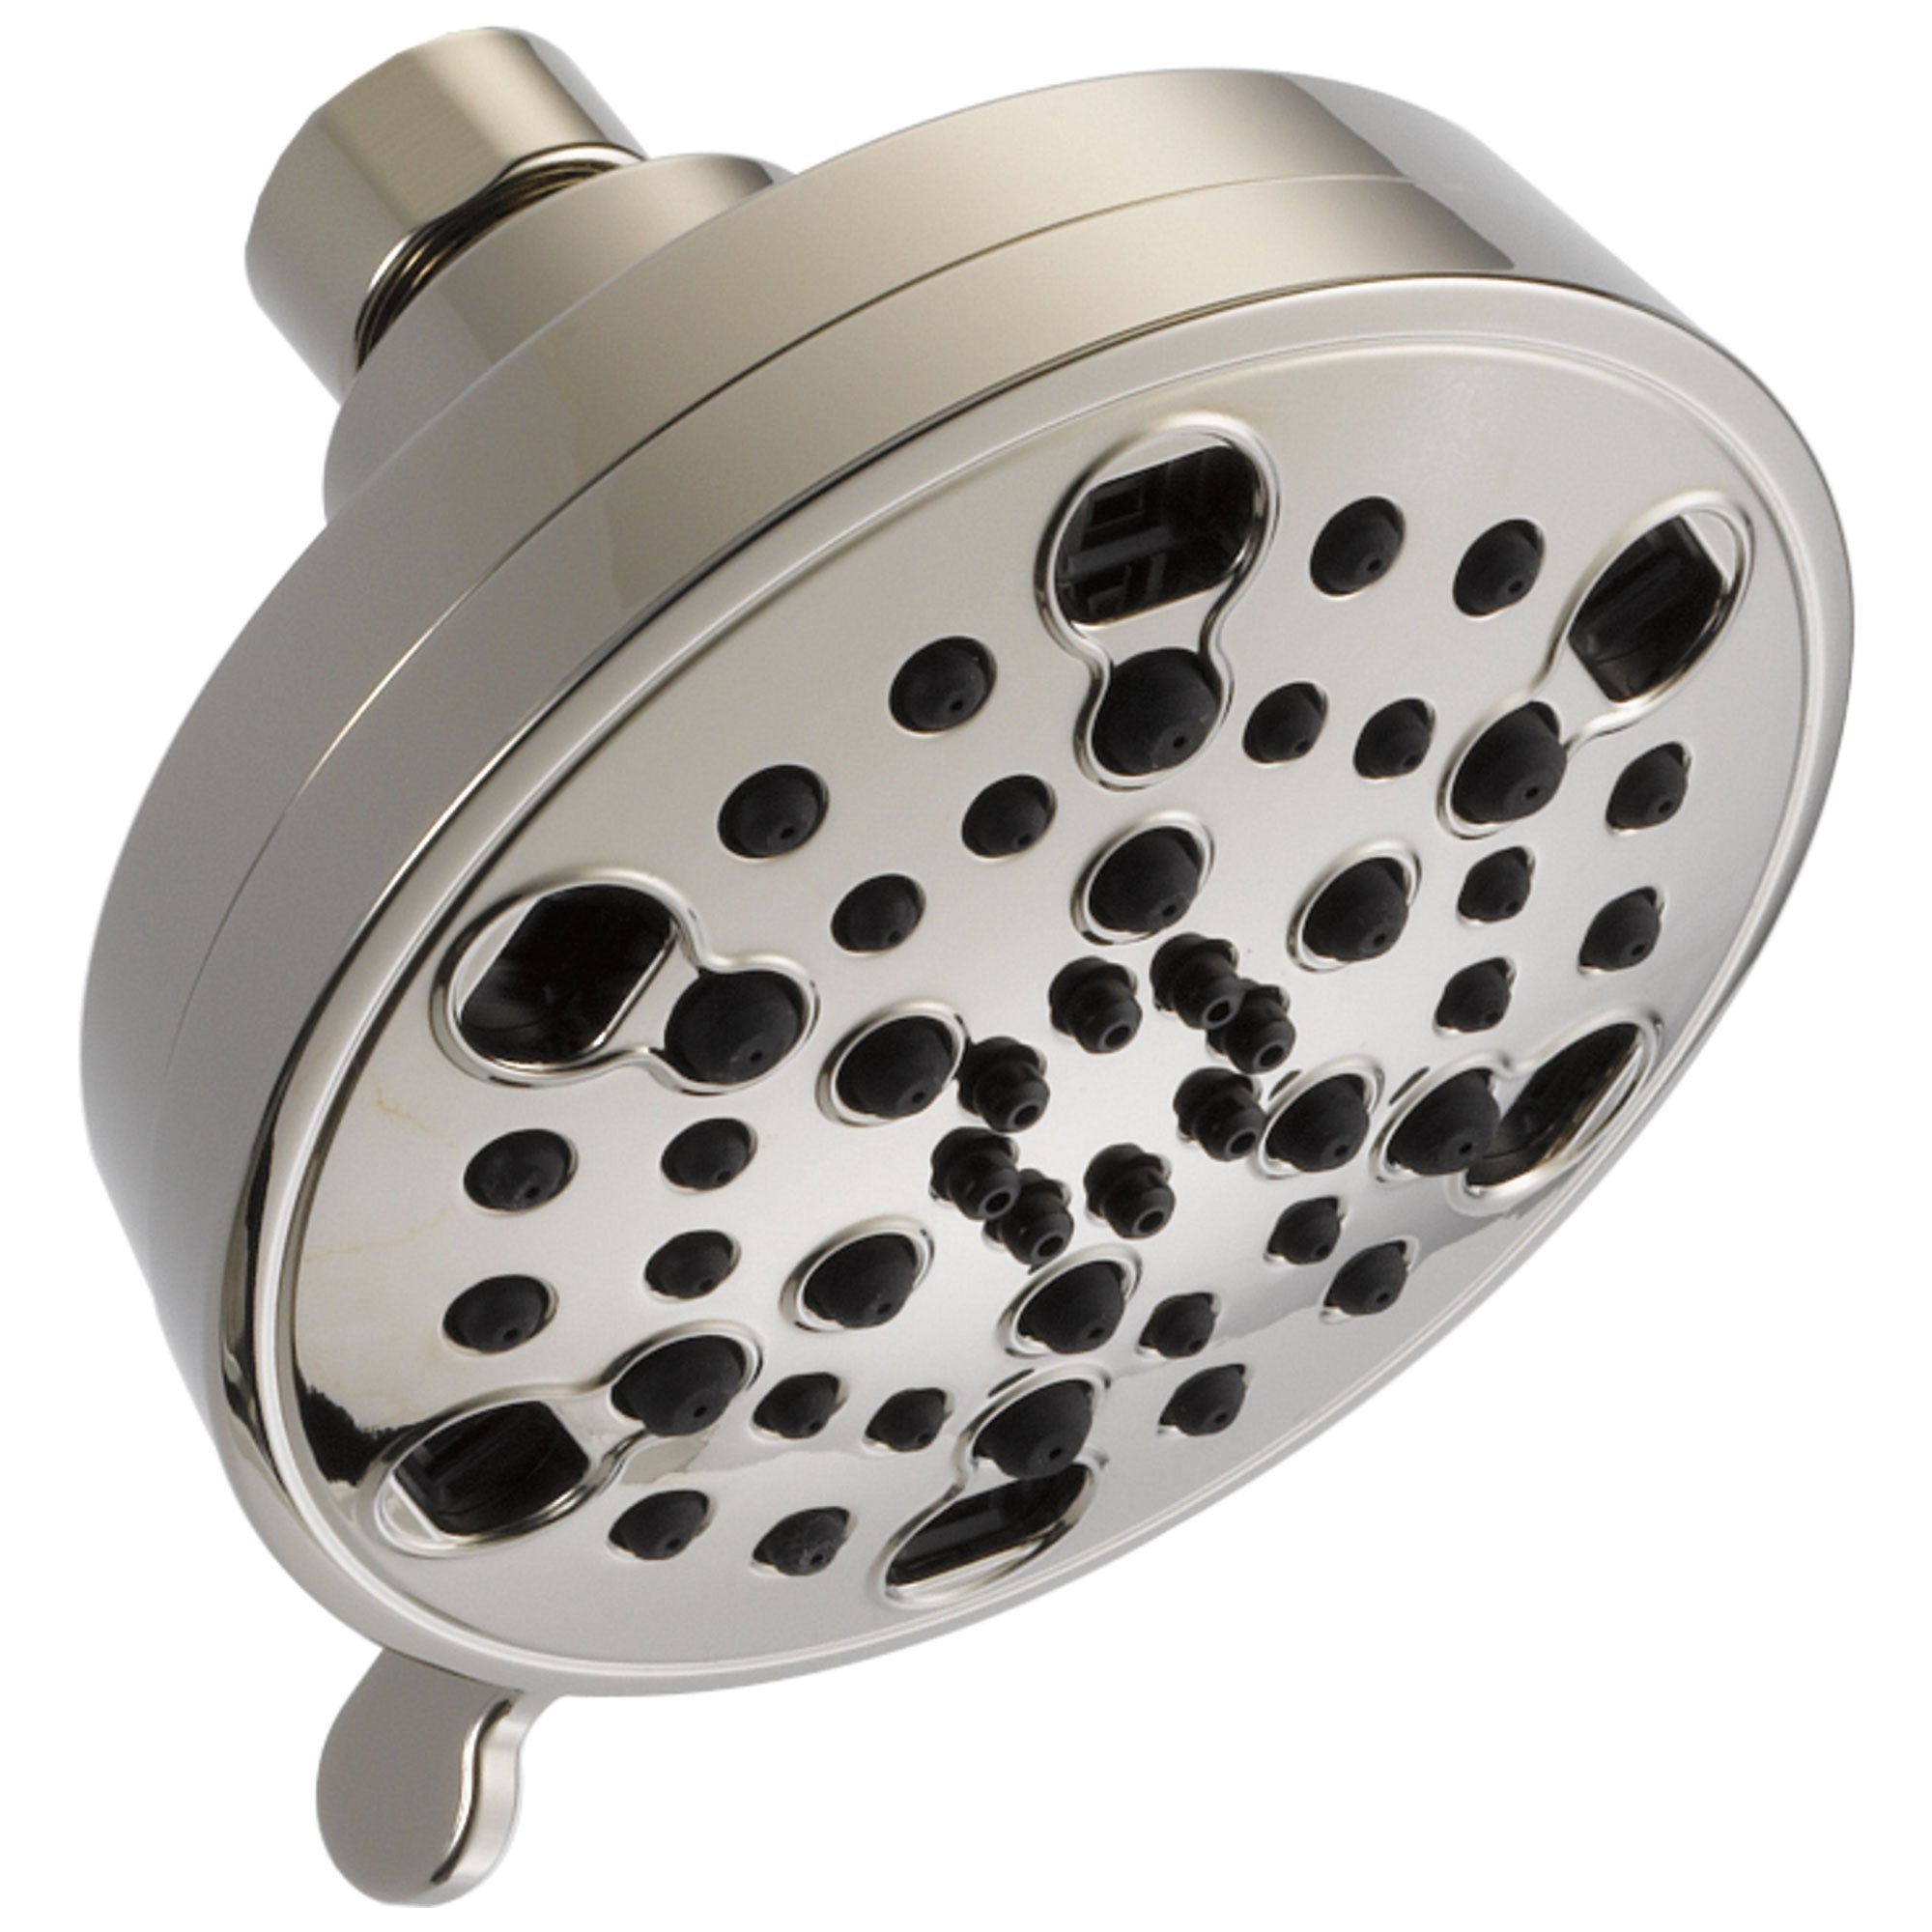 Delta Universal Showering Components Collection Polished Nickel Finish H2Okinetic 5-Setting Contemporary Shower Head 729144